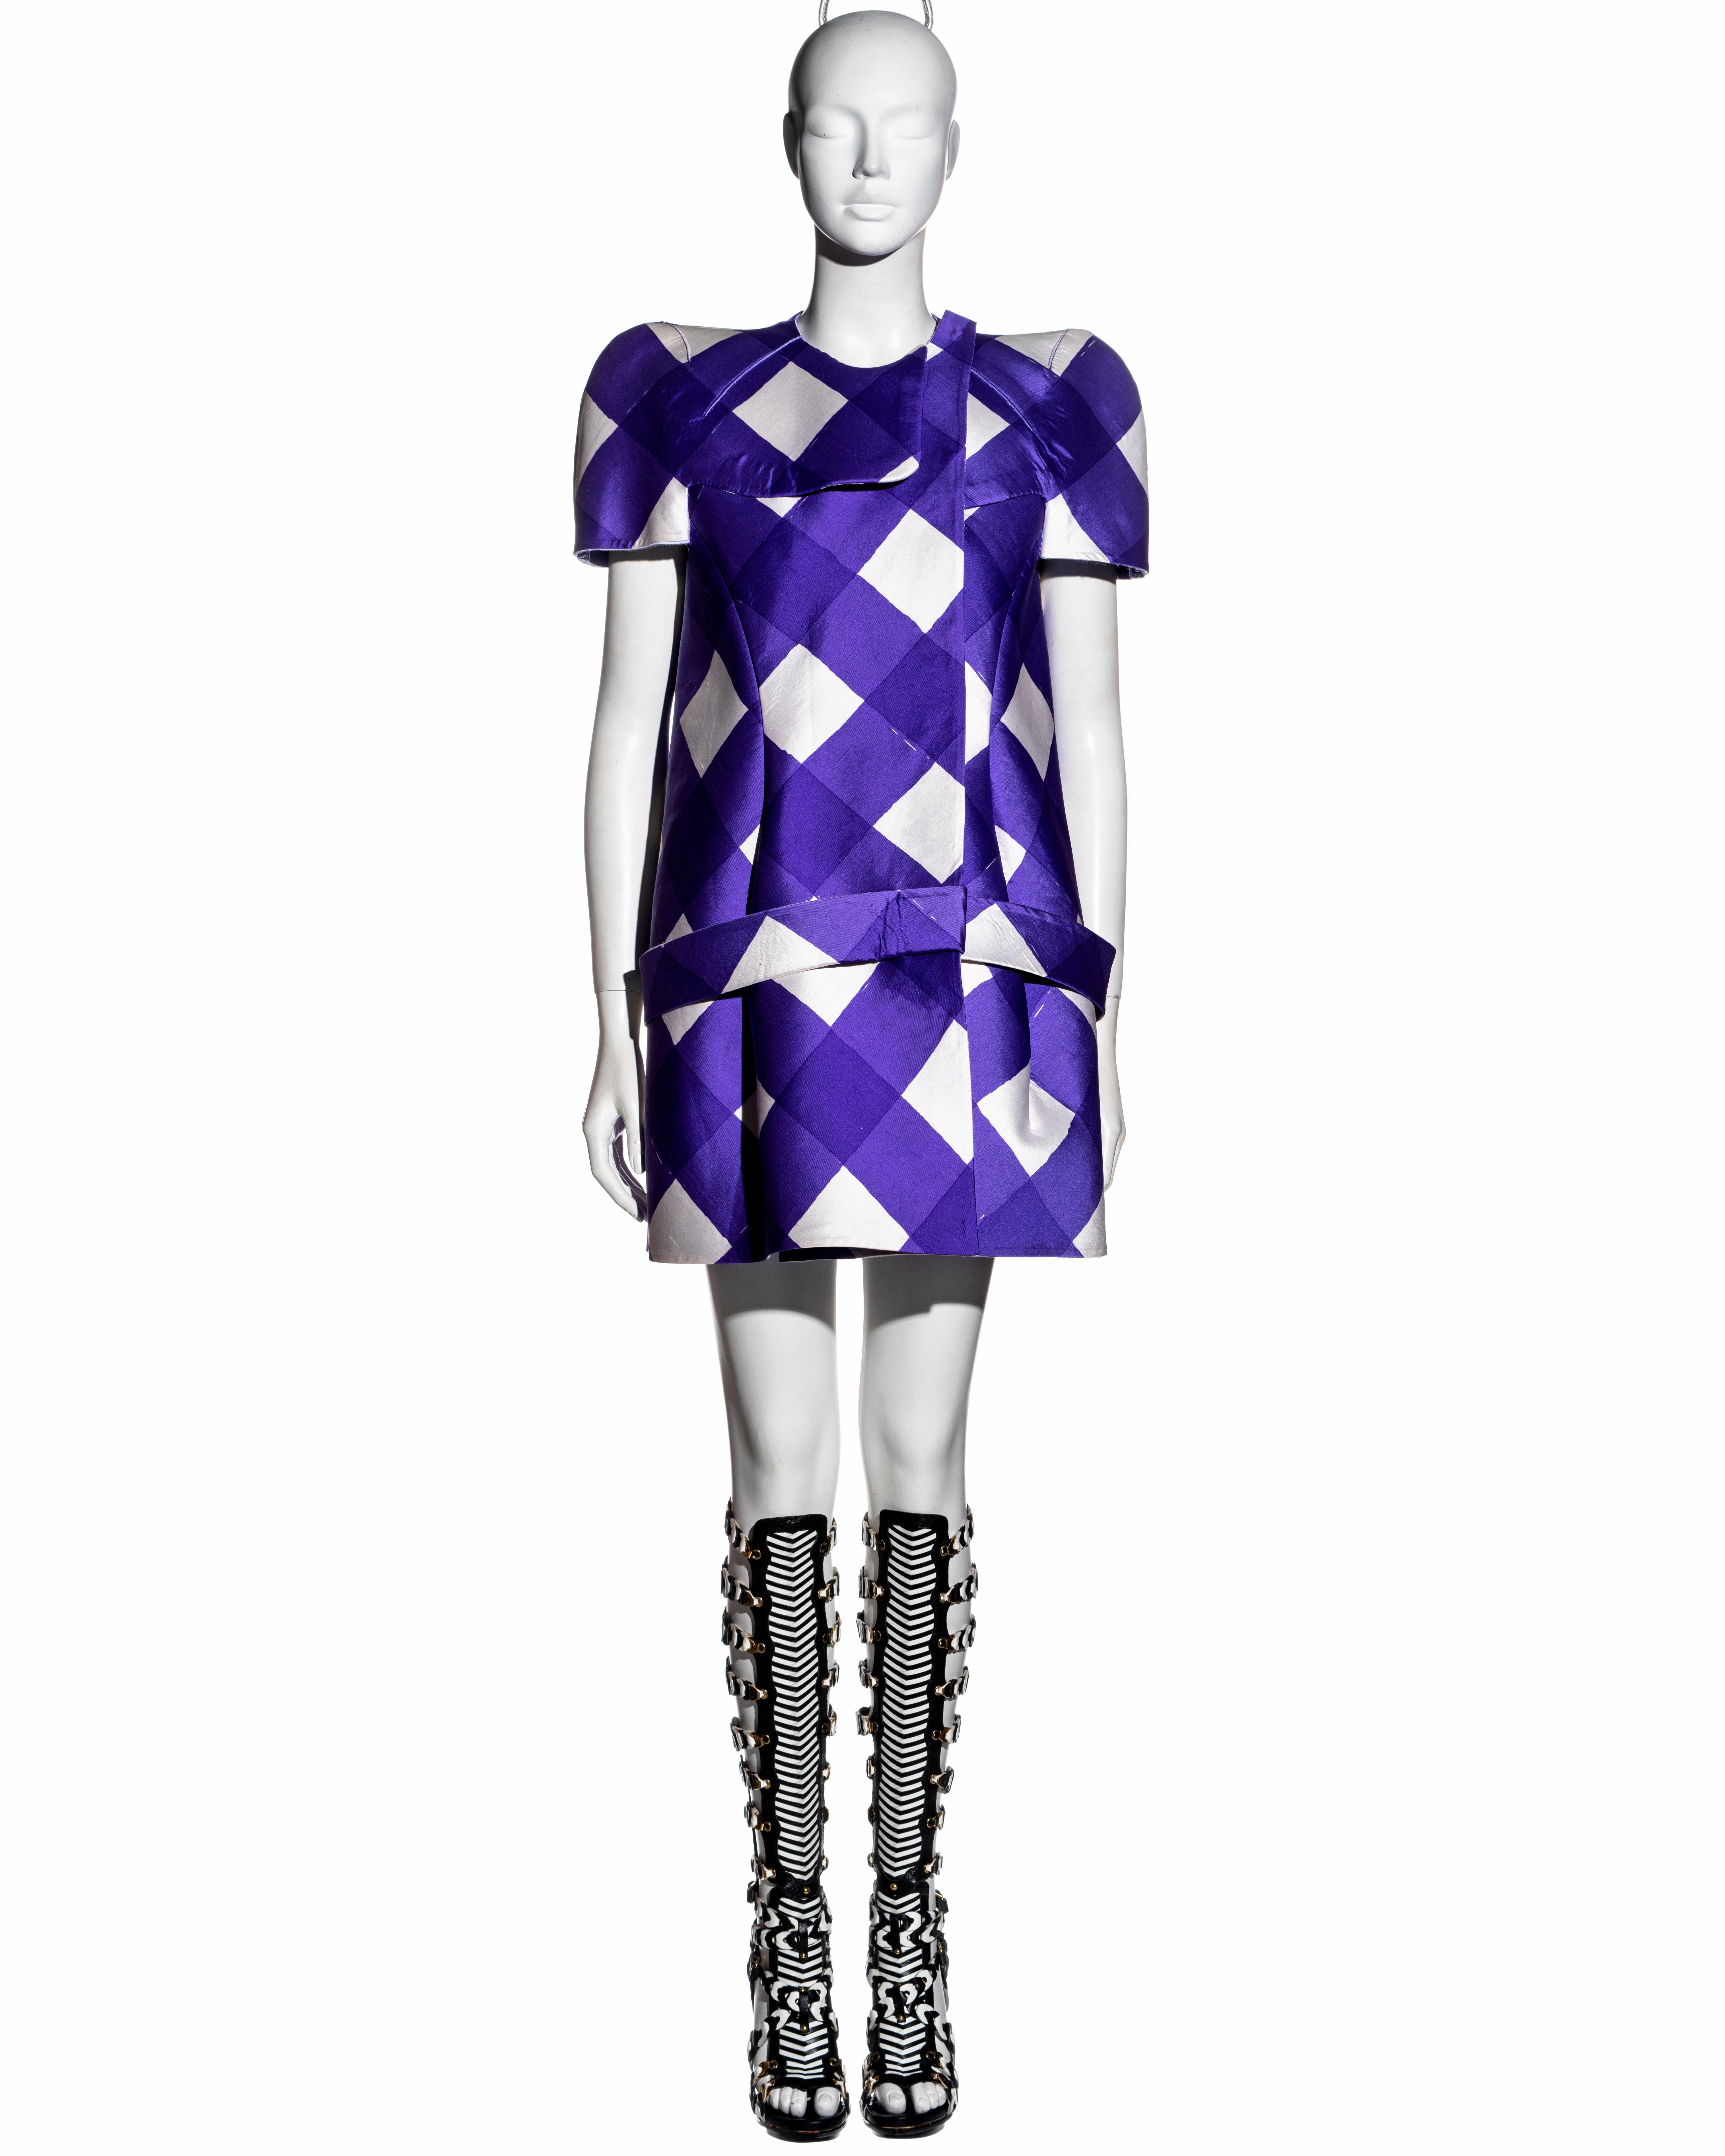 ▪ Important Balenciaga purple and white checked silk mini dress
▪ Designed by Nicolas Ghesquière 
▪ Structured form made out of silk backed with foam
▪ Edges expose the layers of fabric sliced using a high-tech ultrasound machine
▪ Attached belt at